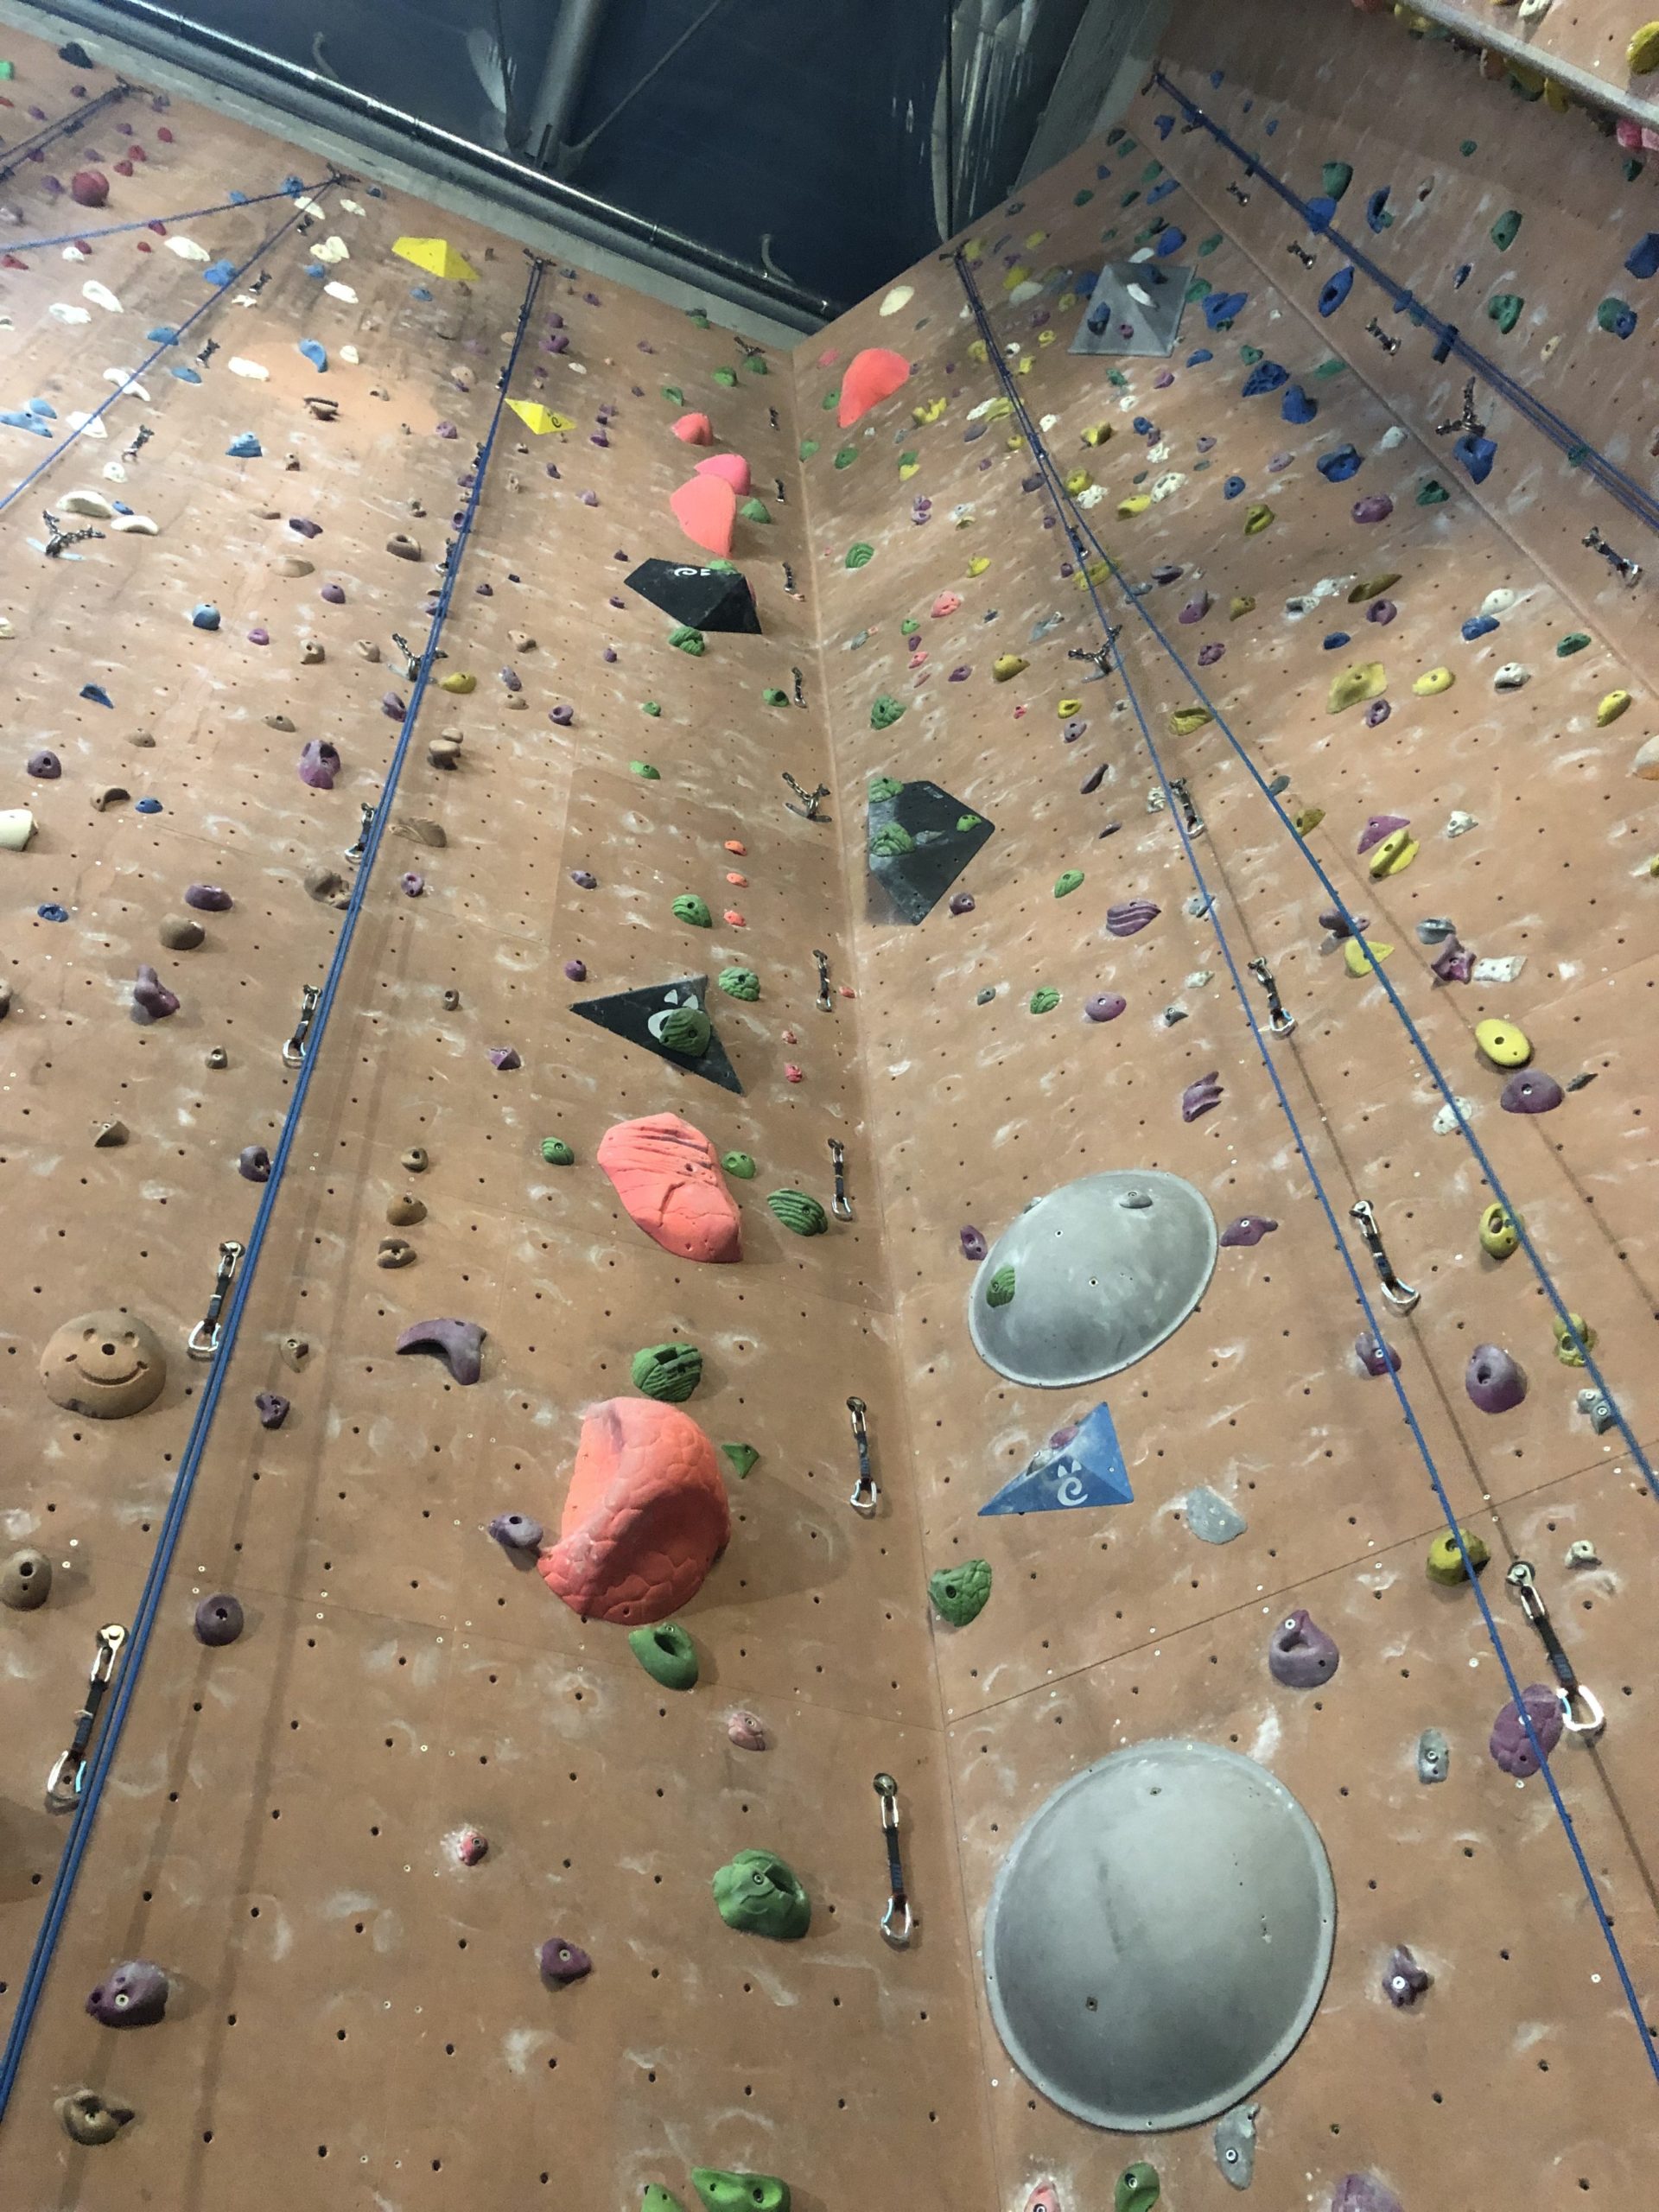 A gentle increase in climbing ability